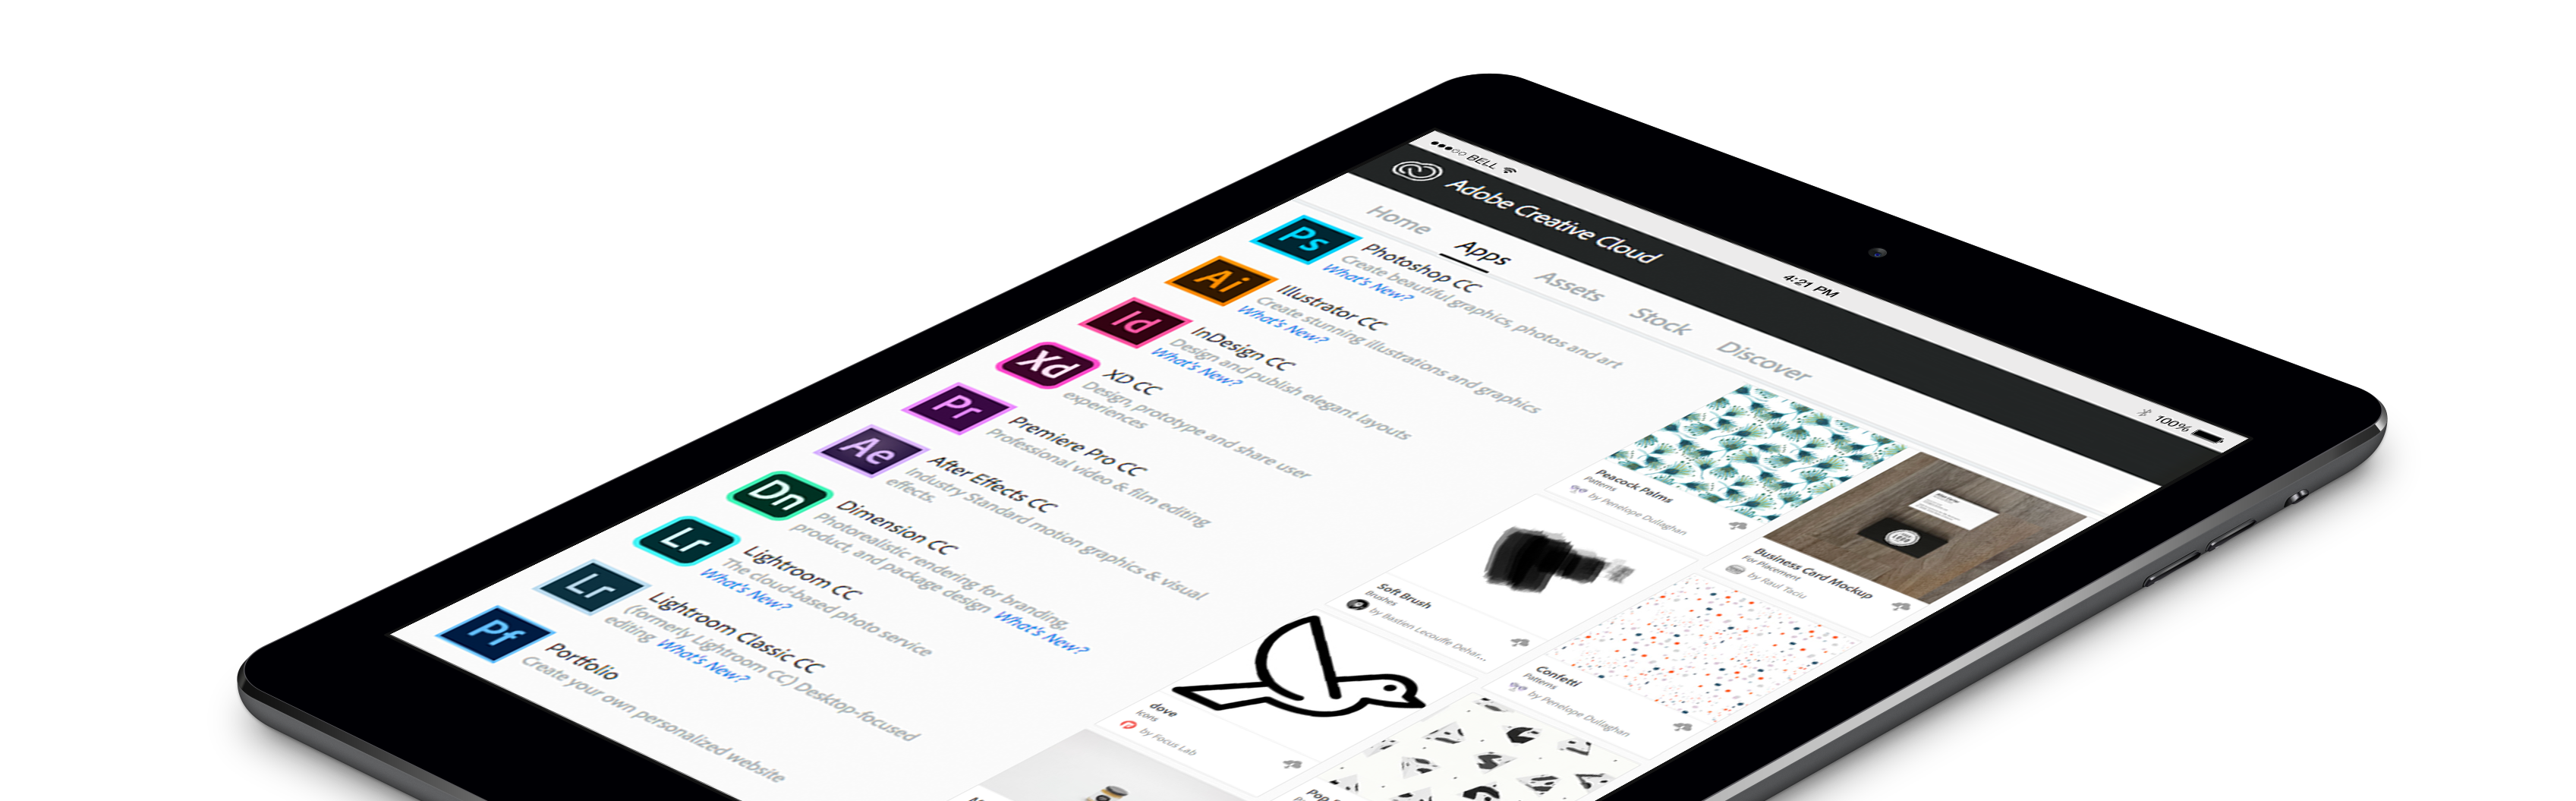 Other eLearning Tools with Adobe